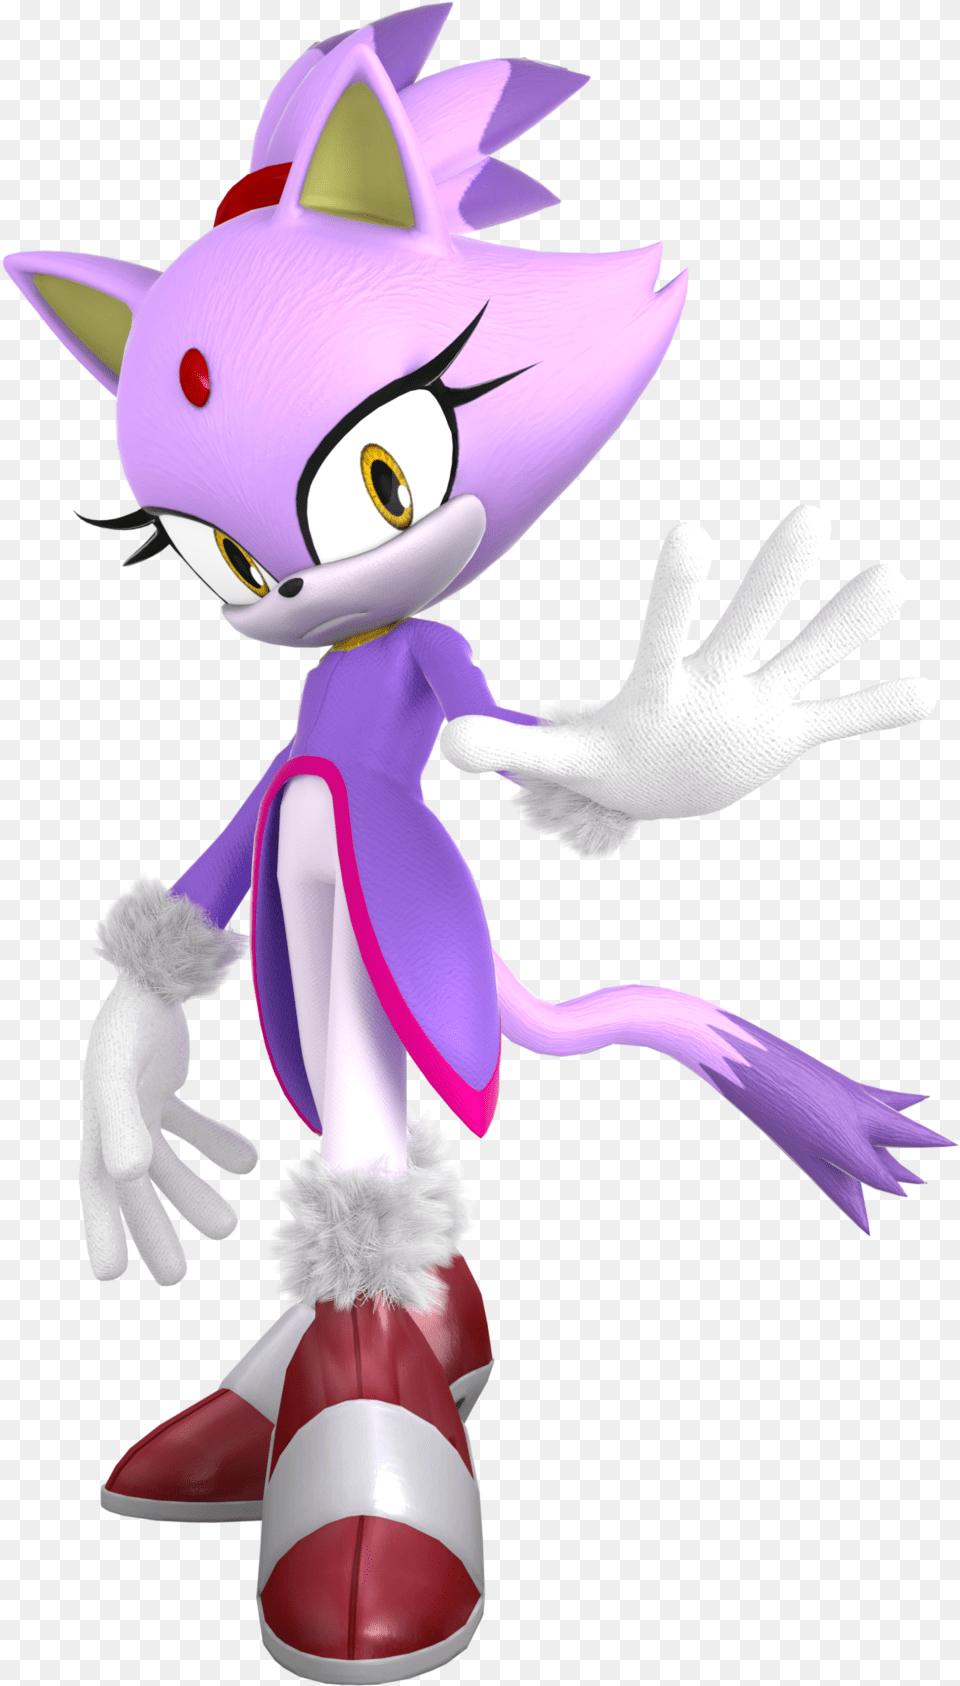 Blaze The Cat By Tailsmiles249 Blaze The Cat, Clothing, Glove, Toy, Footwear Free Png